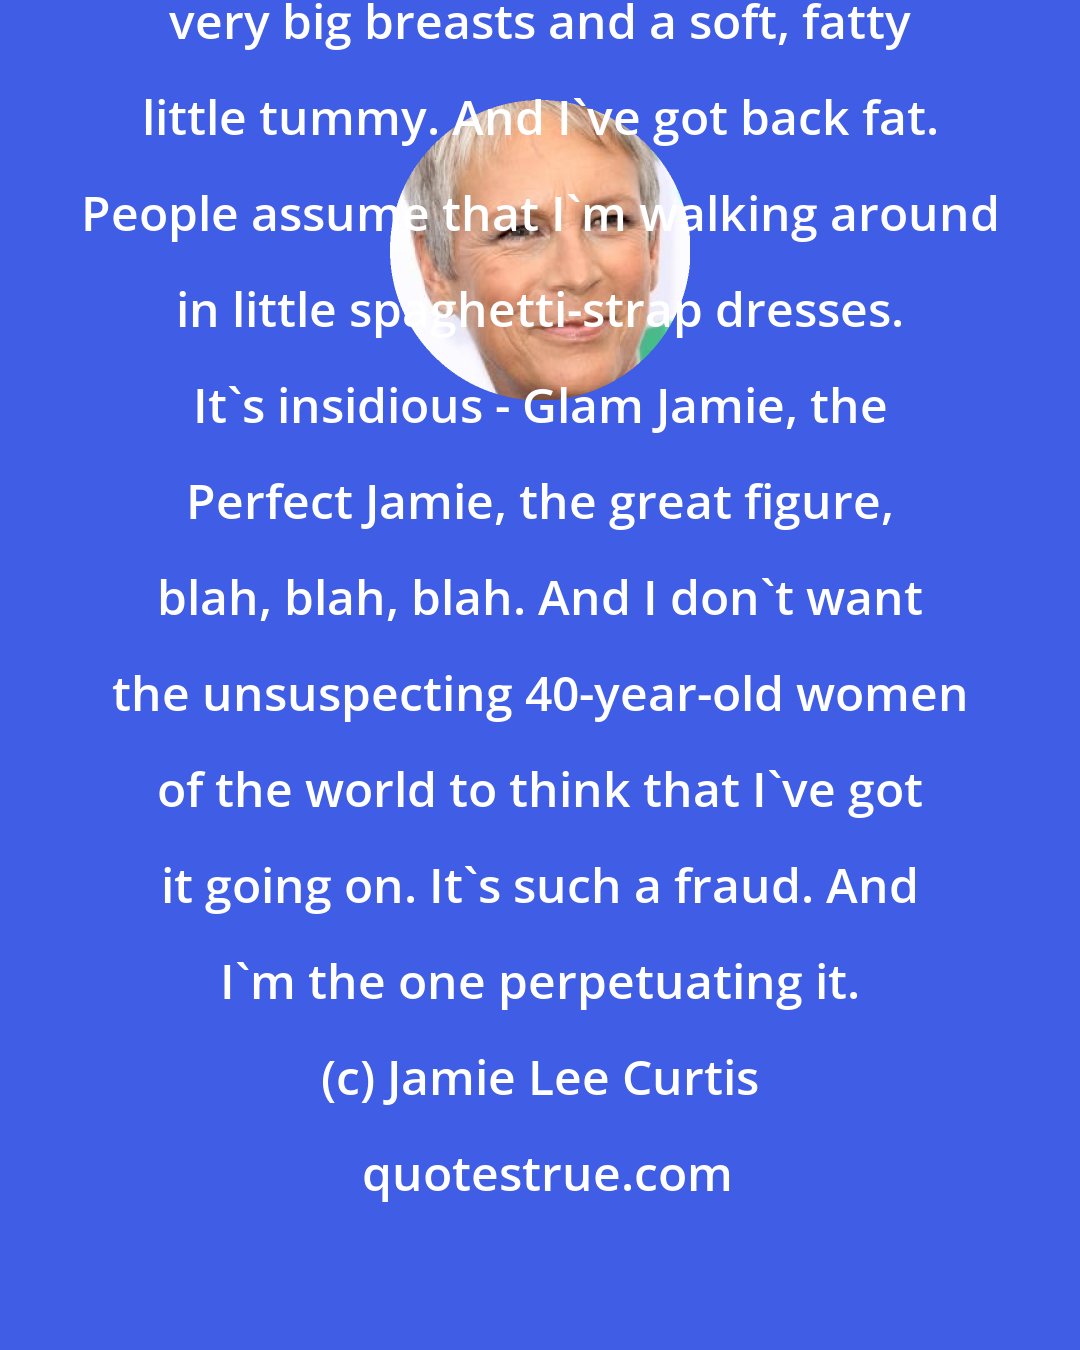 Jamie Lee Curtis: I don't have great thighs. I have very big breasts and a soft, fatty little tummy. And I've got back fat. People assume that I'm walking around in little spaghetti-strap dresses. It's insidious - Glam Jamie, the Perfect Jamie, the great figure, blah, blah, blah. And I don't want the unsuspecting 40-year-old women of the world to think that I've got it going on. It's such a fraud. And I'm the one perpetuating it.